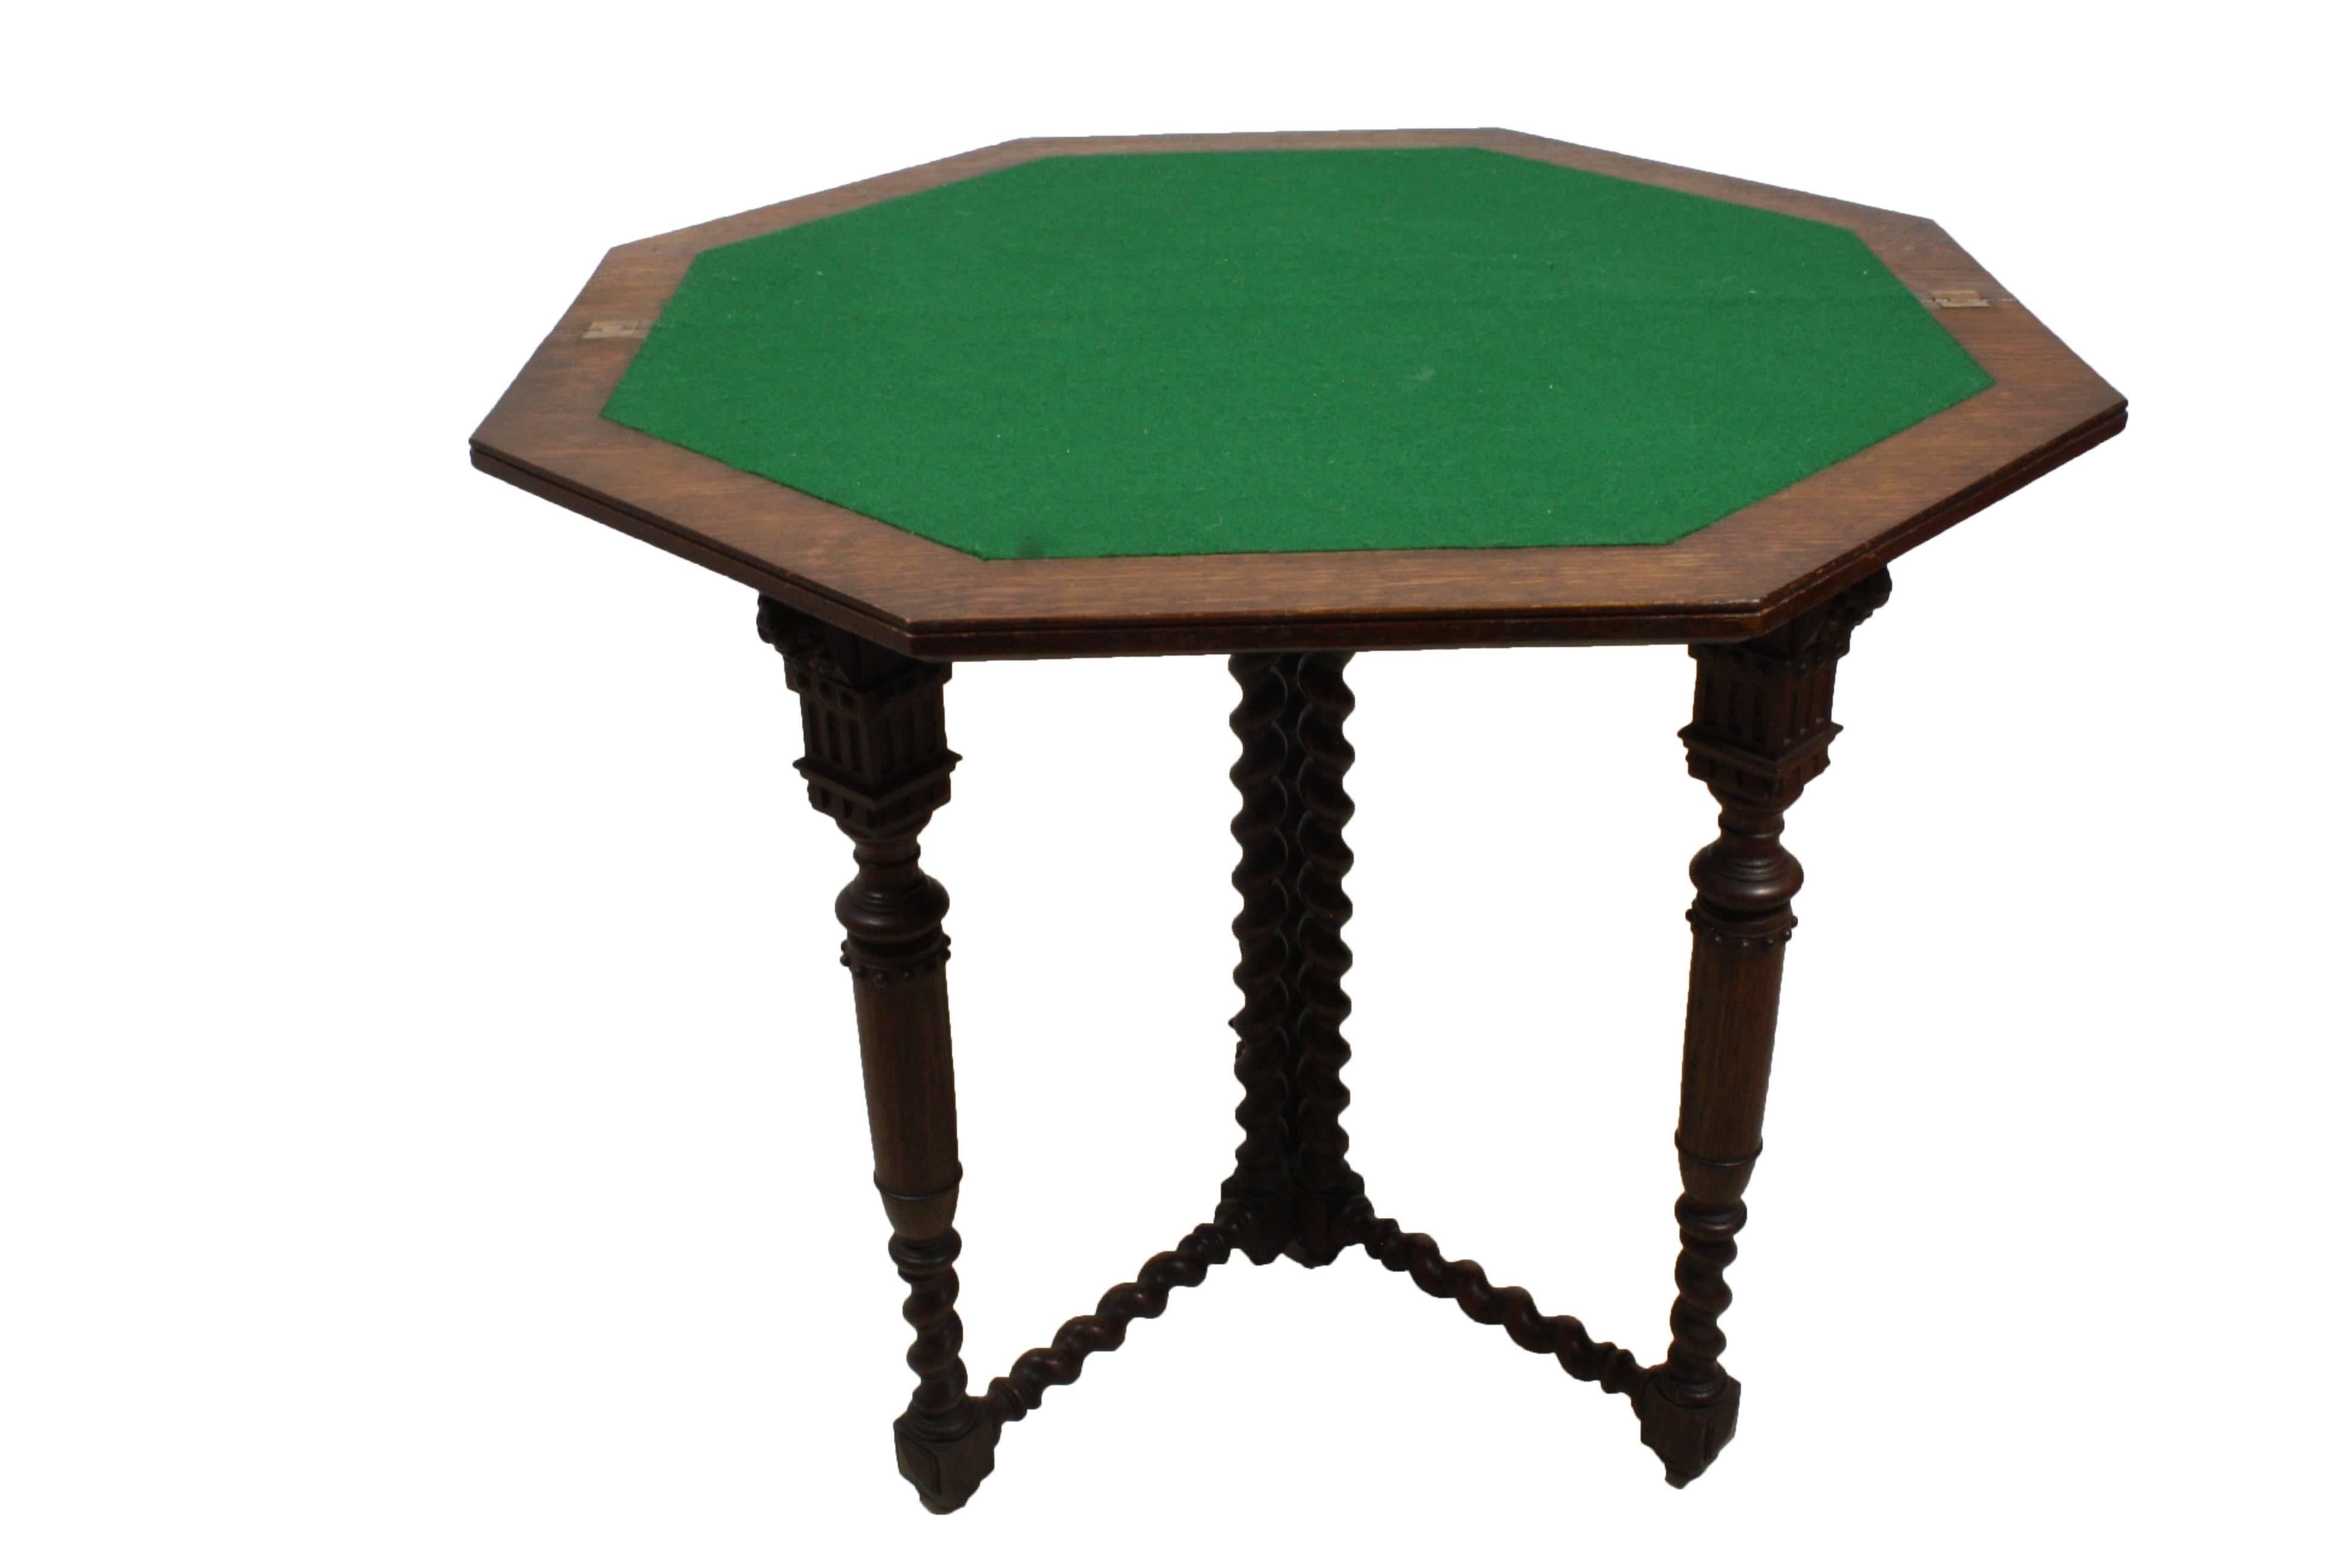 A convertible side table, or hallway table, that opens into a felt covered gaming surface. Barley twist stretchers and support spindles make for an eye-catching backdrop to the nicely carved lions heads and turned legs. 

Measured: 32" wide